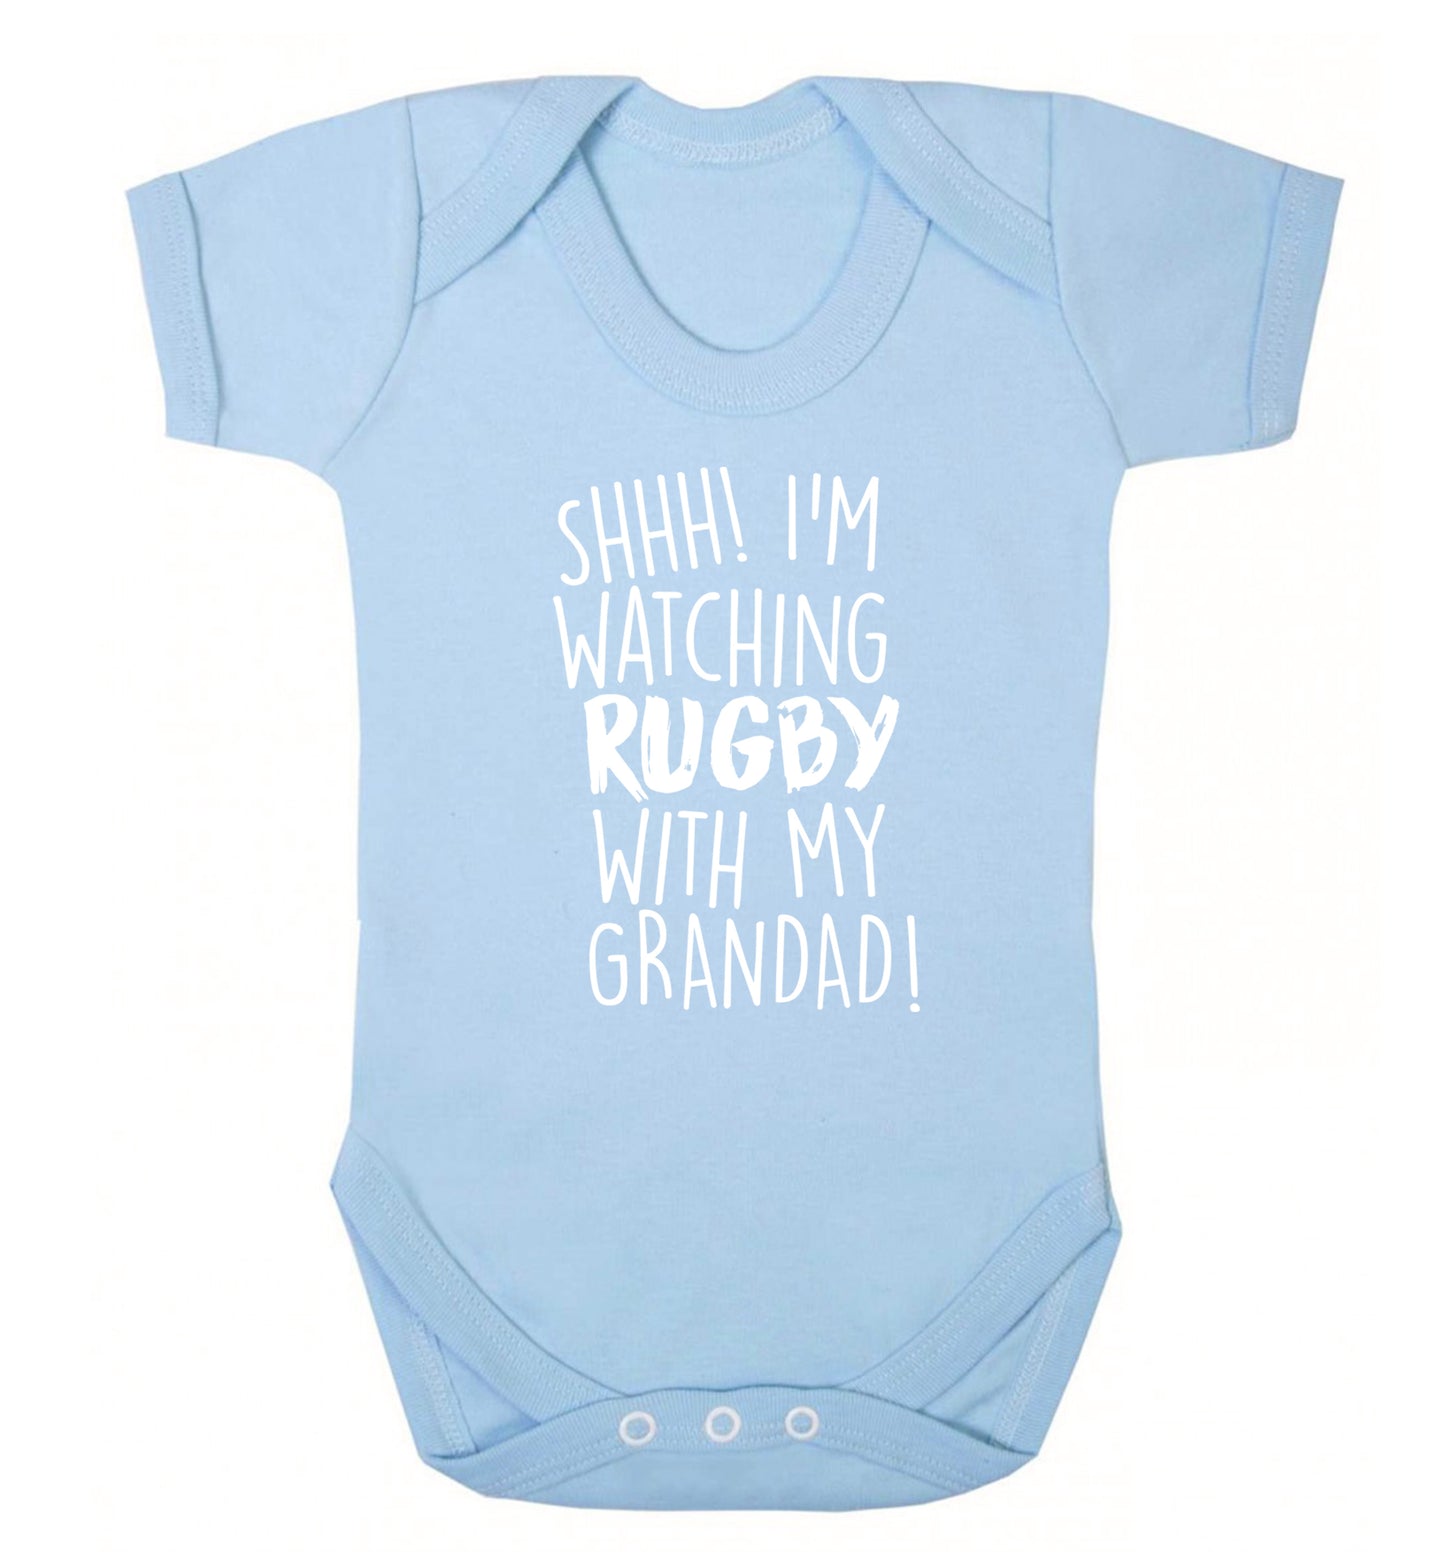 Shh I'm watching rugby with my grandaughter Baby Vest pale blue 18-24 months